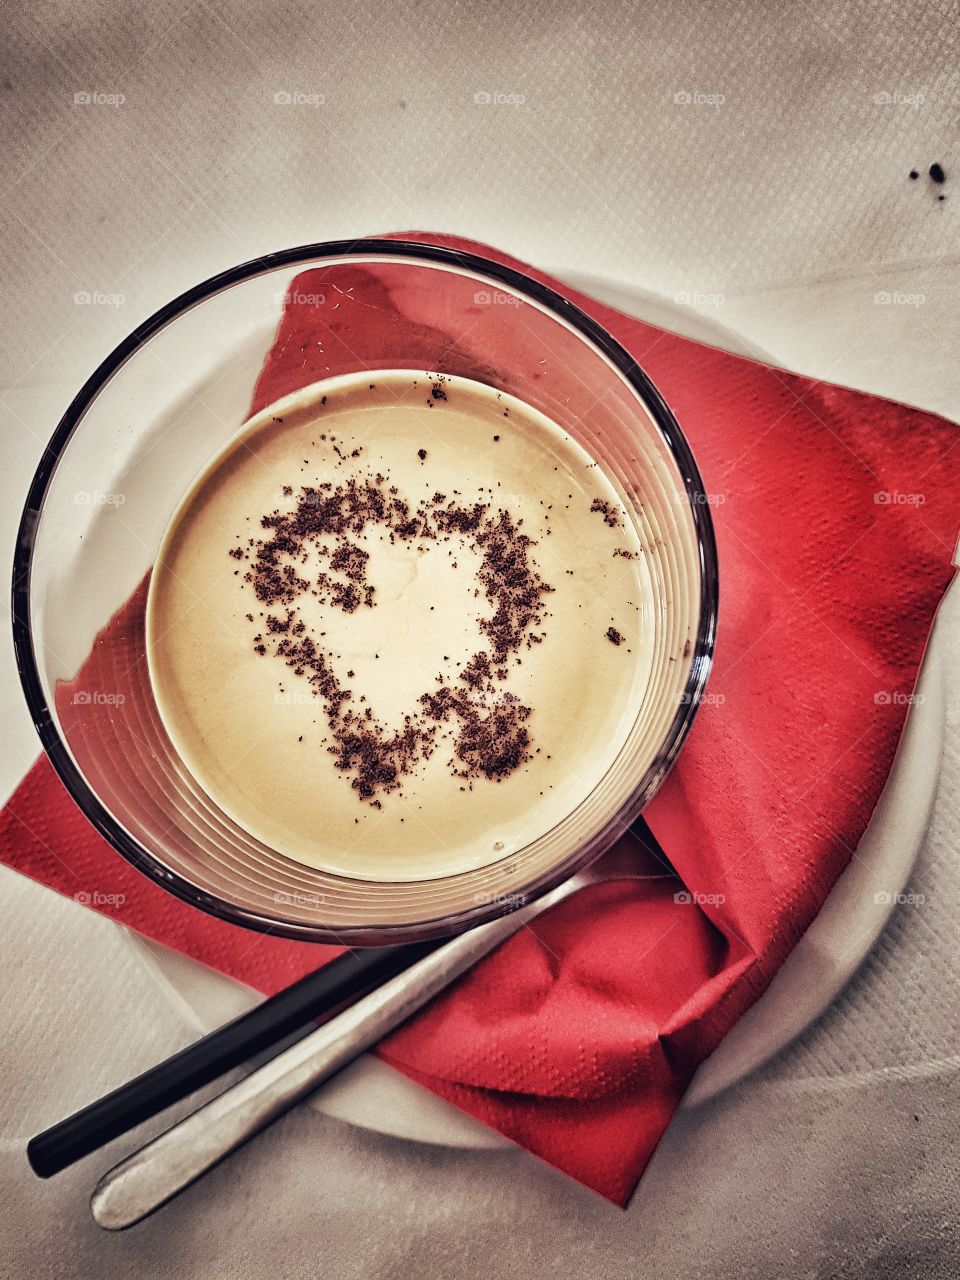 Heart shape made from coffee